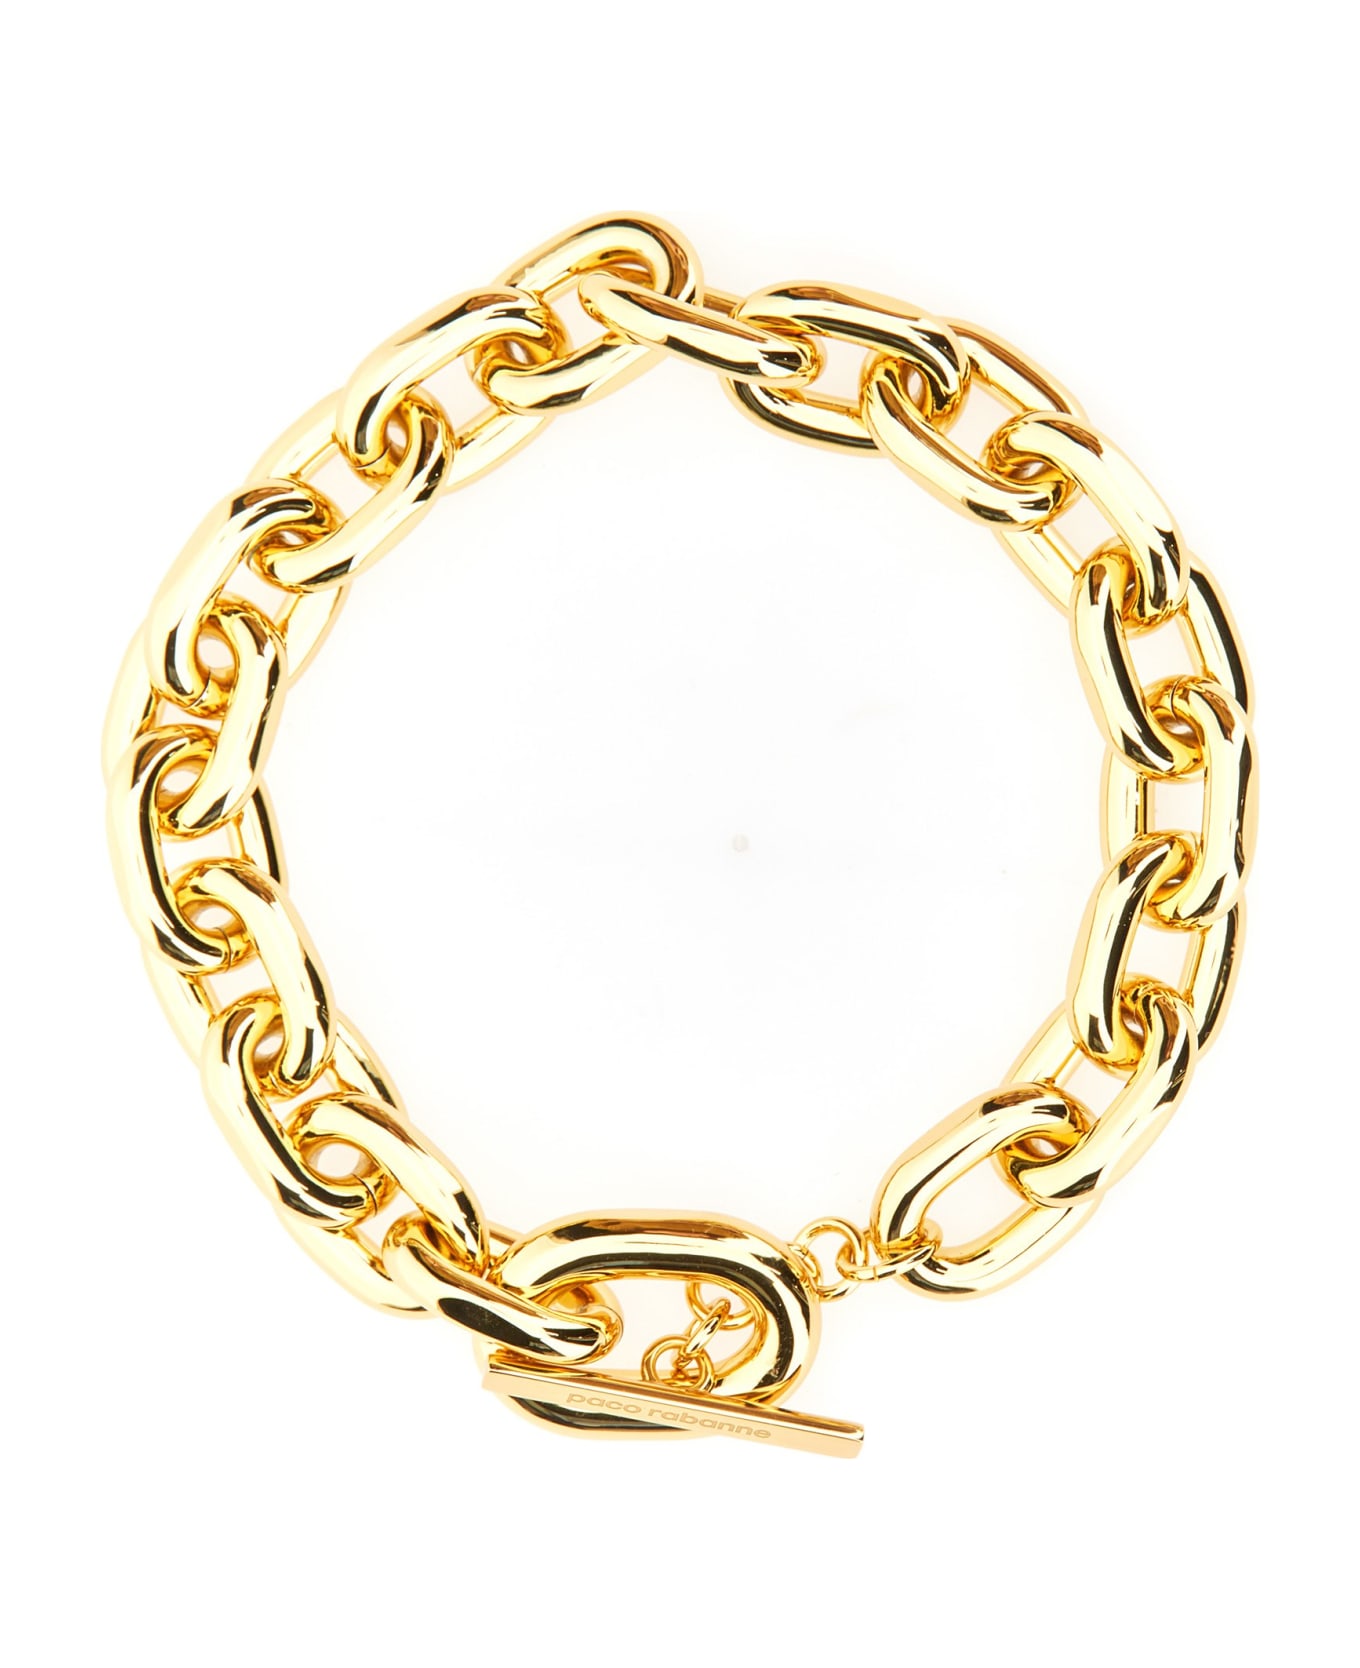 Paco Rabanne Necklace Xl Link - GOLD